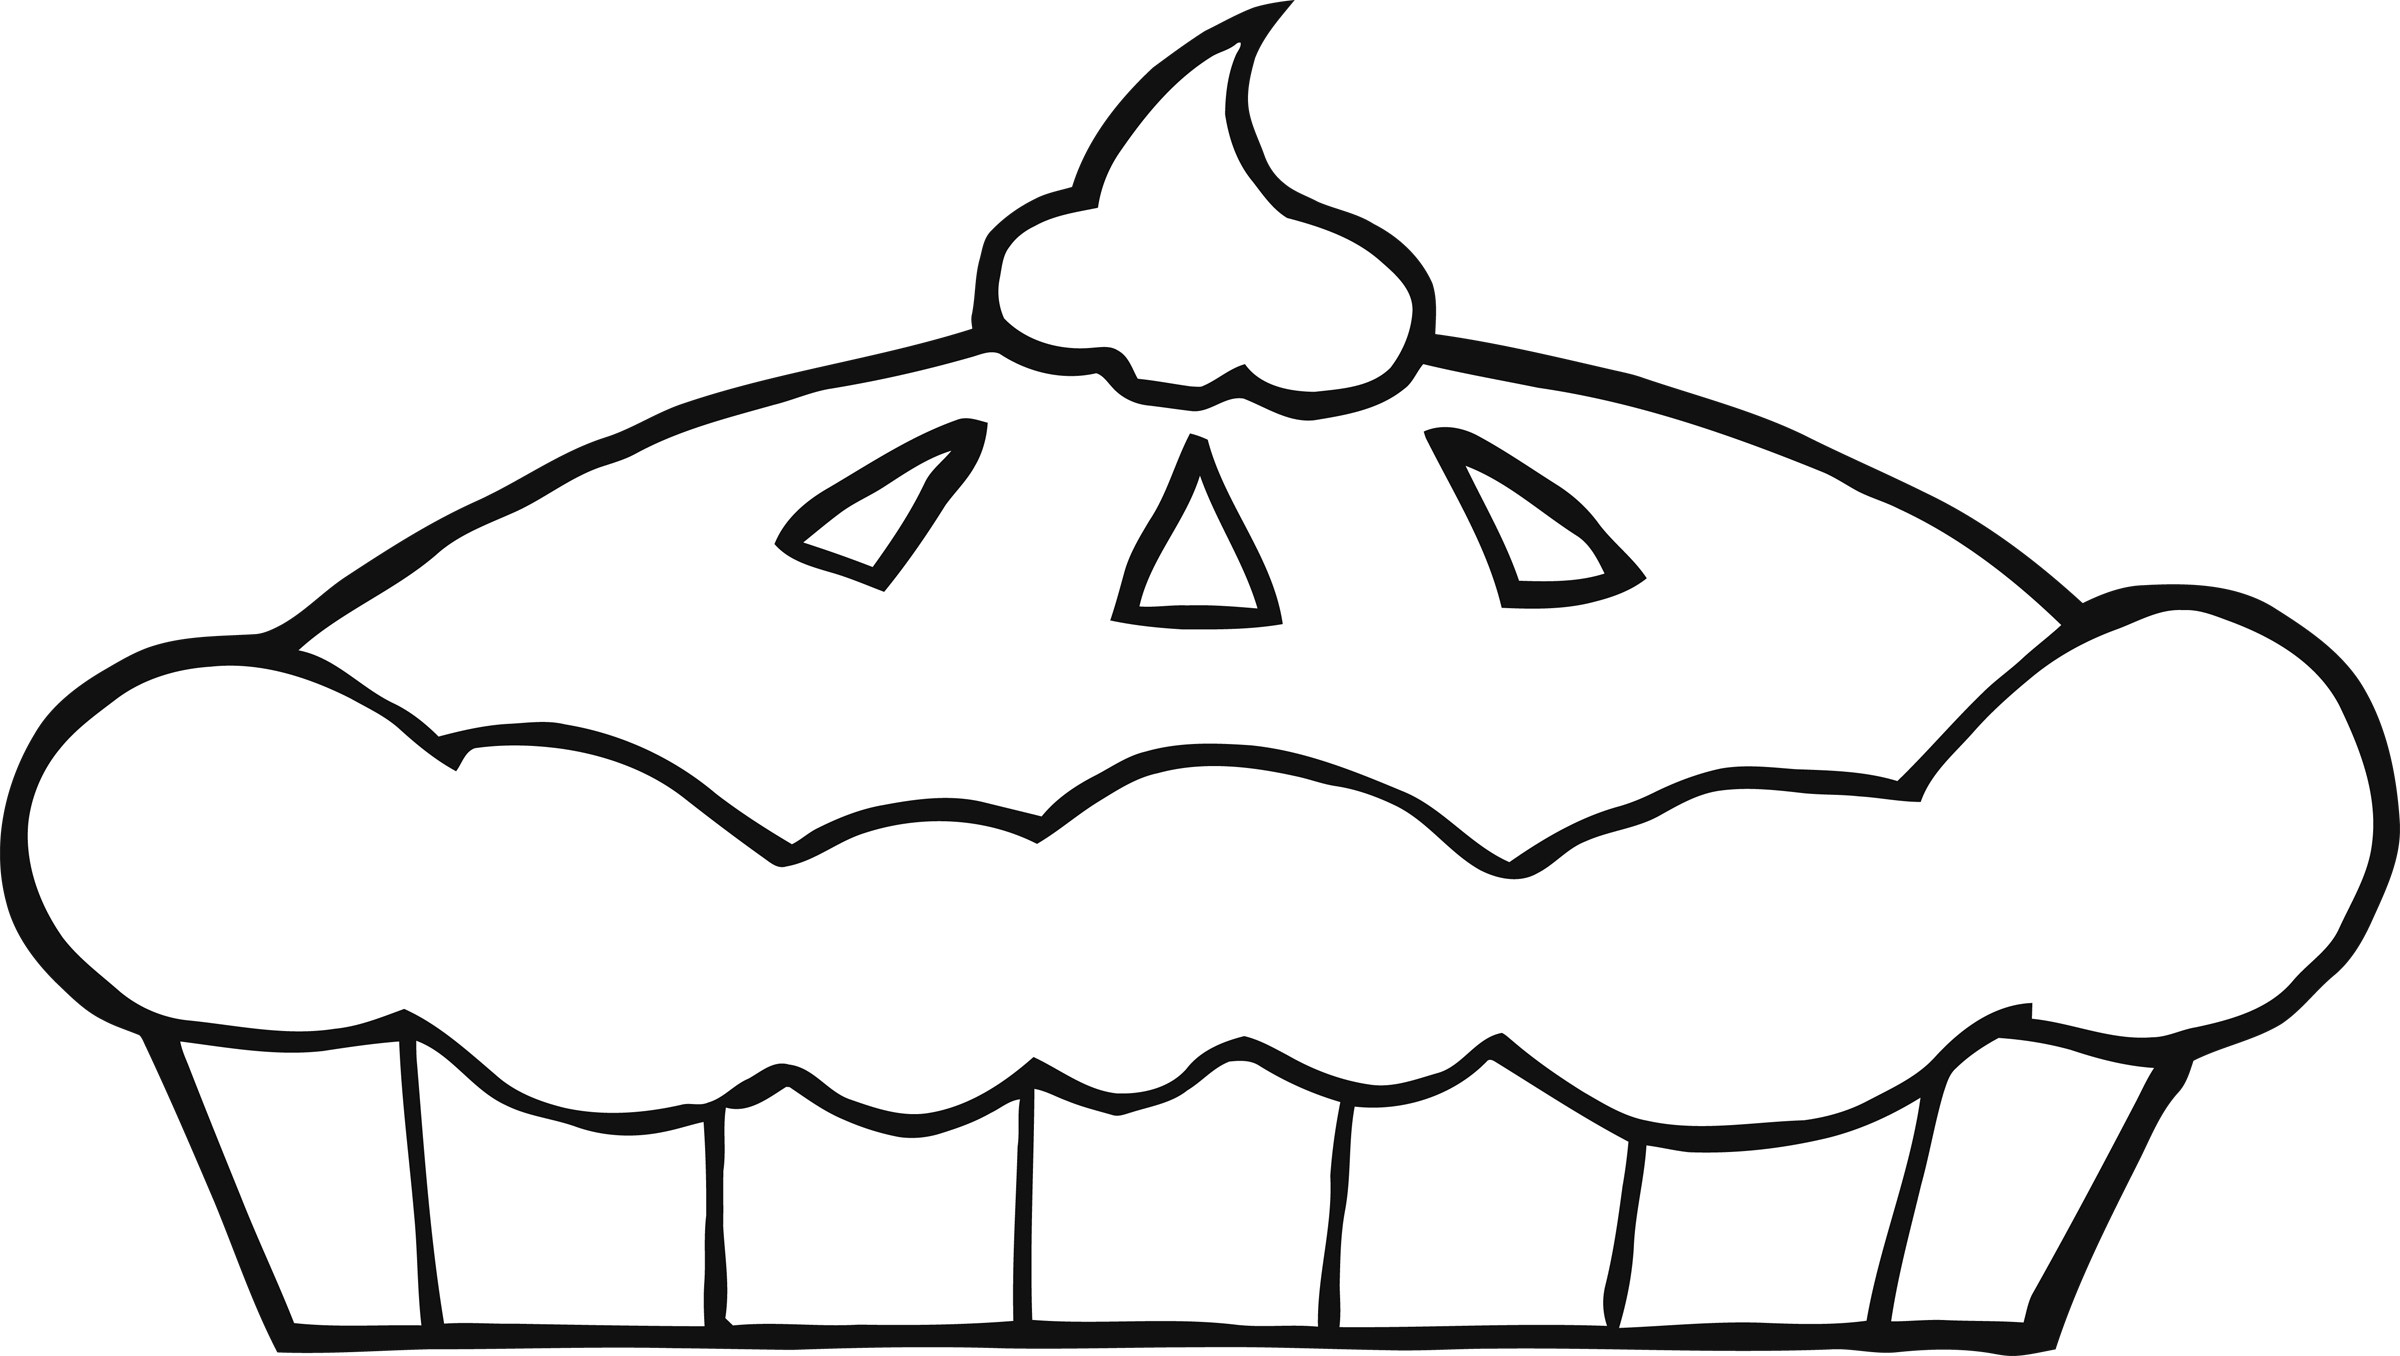 Pie Clipart Black And White   Clipart Panda   Free Clipart Images